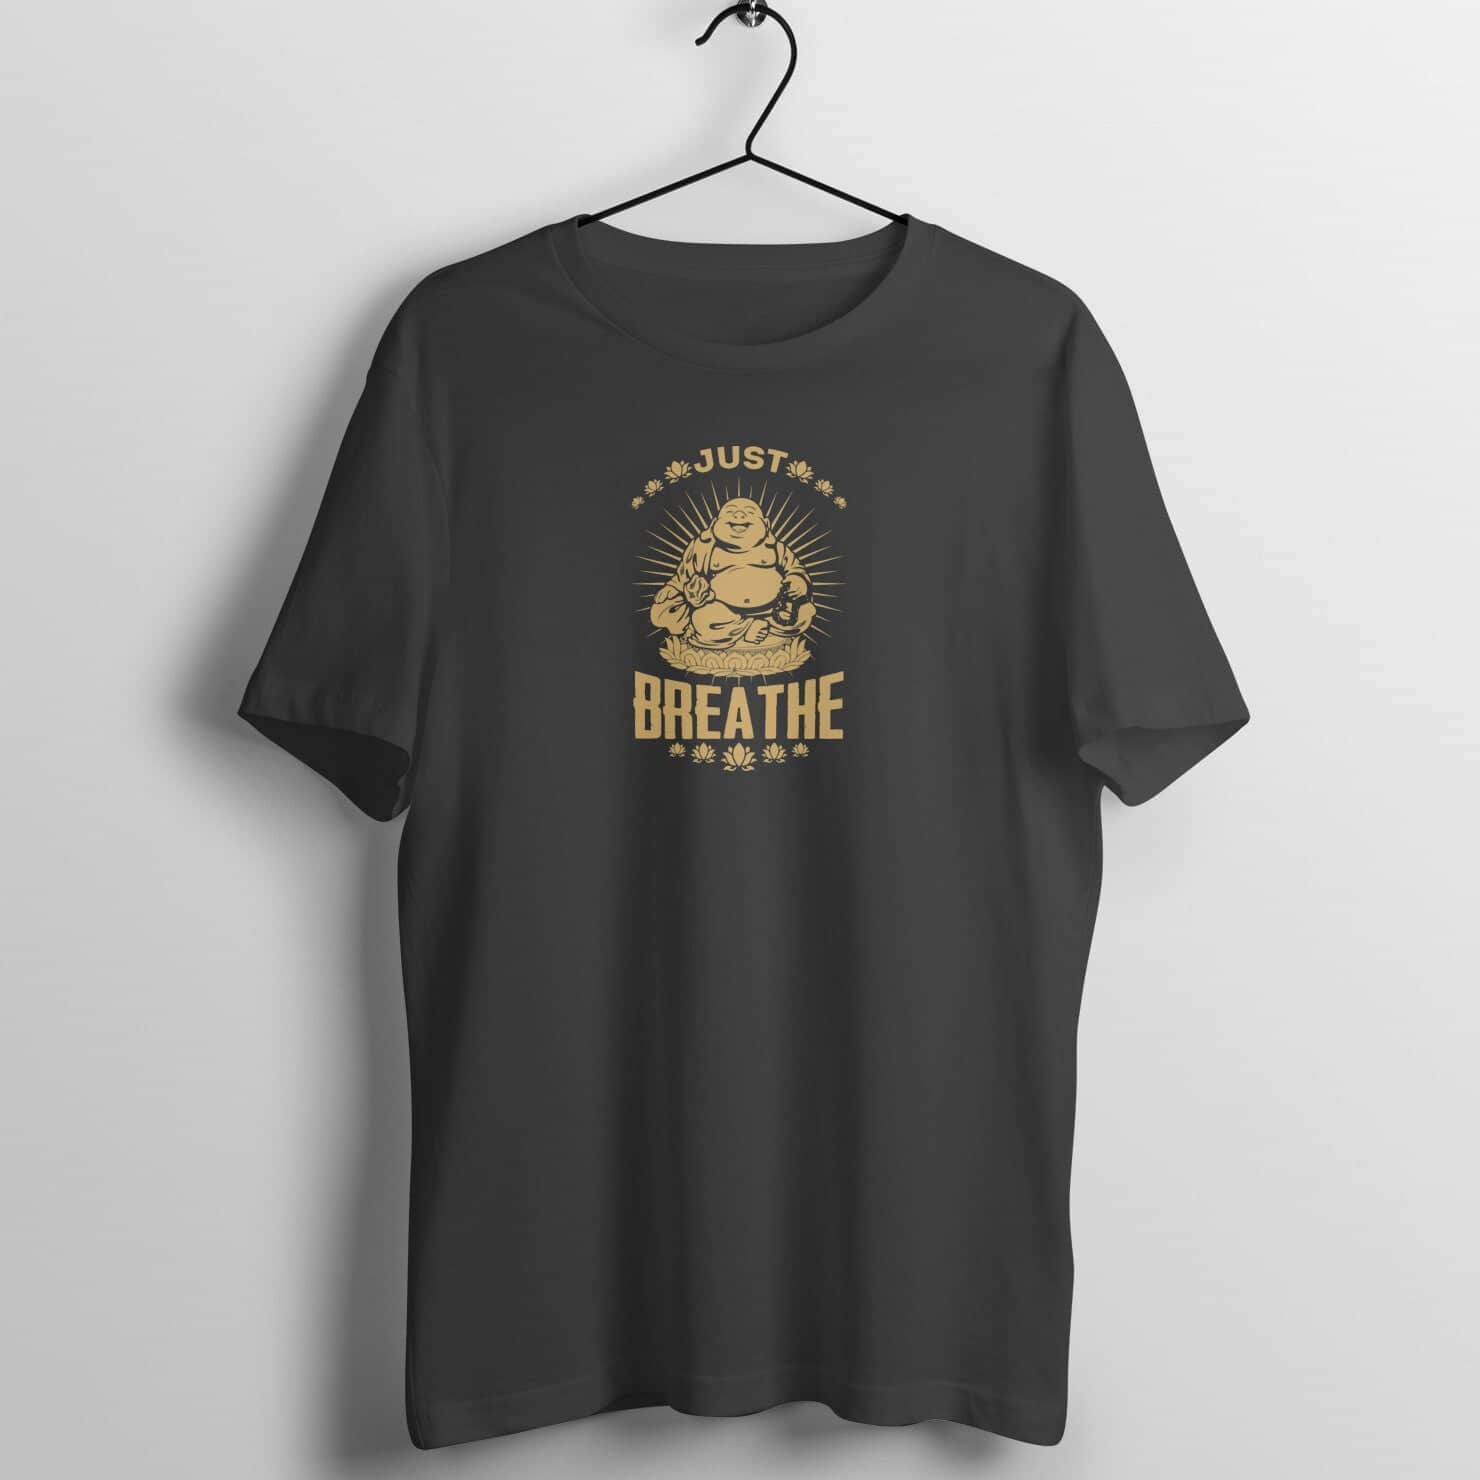 Just Breathe Exclusive Laughing Buddha Lucky T Shirt for Men and Women Printrove Black S 